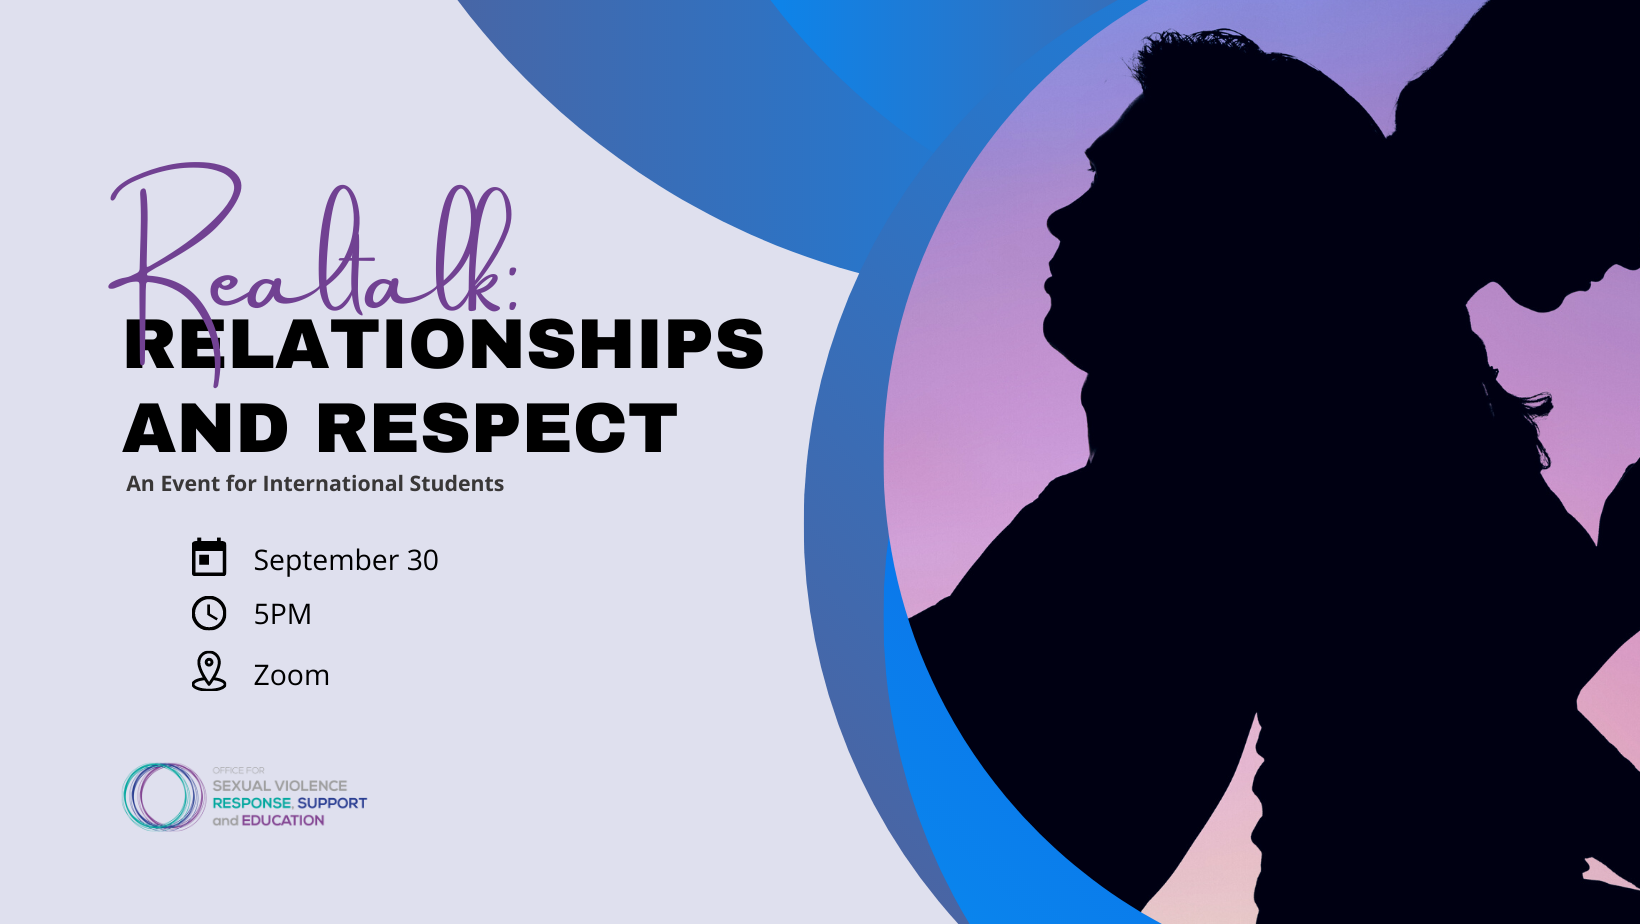 realtalk relationship and respect event banner with the date and time written on a purple background and a silhouette of two people leaning into each other and sunset in the background on the right